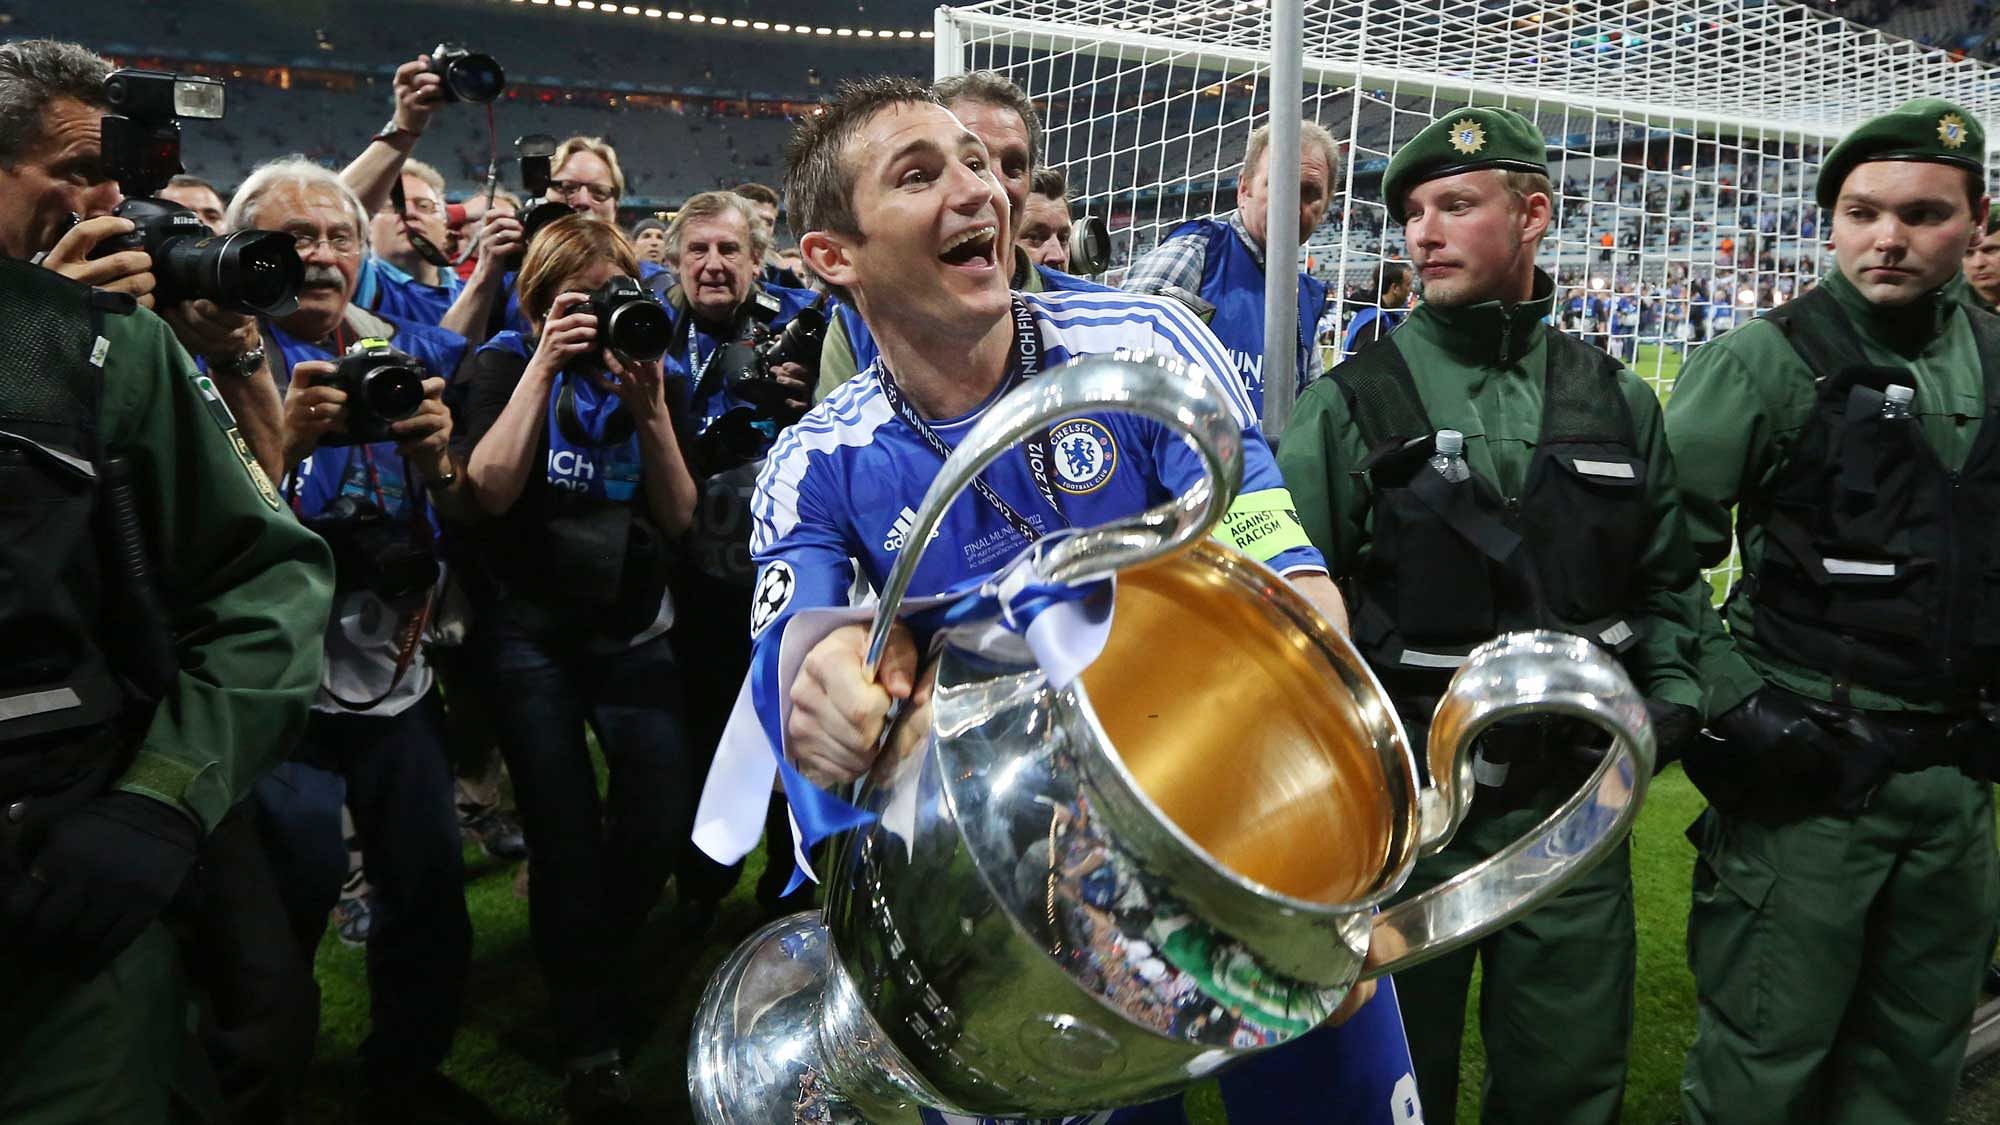 Frank Lampard celebrates with the trophy after the  Champions League final soccer match between Bayern Munich and Chelsea in Munich, Germany Saturday May 19, 2012. (Photo: AP)